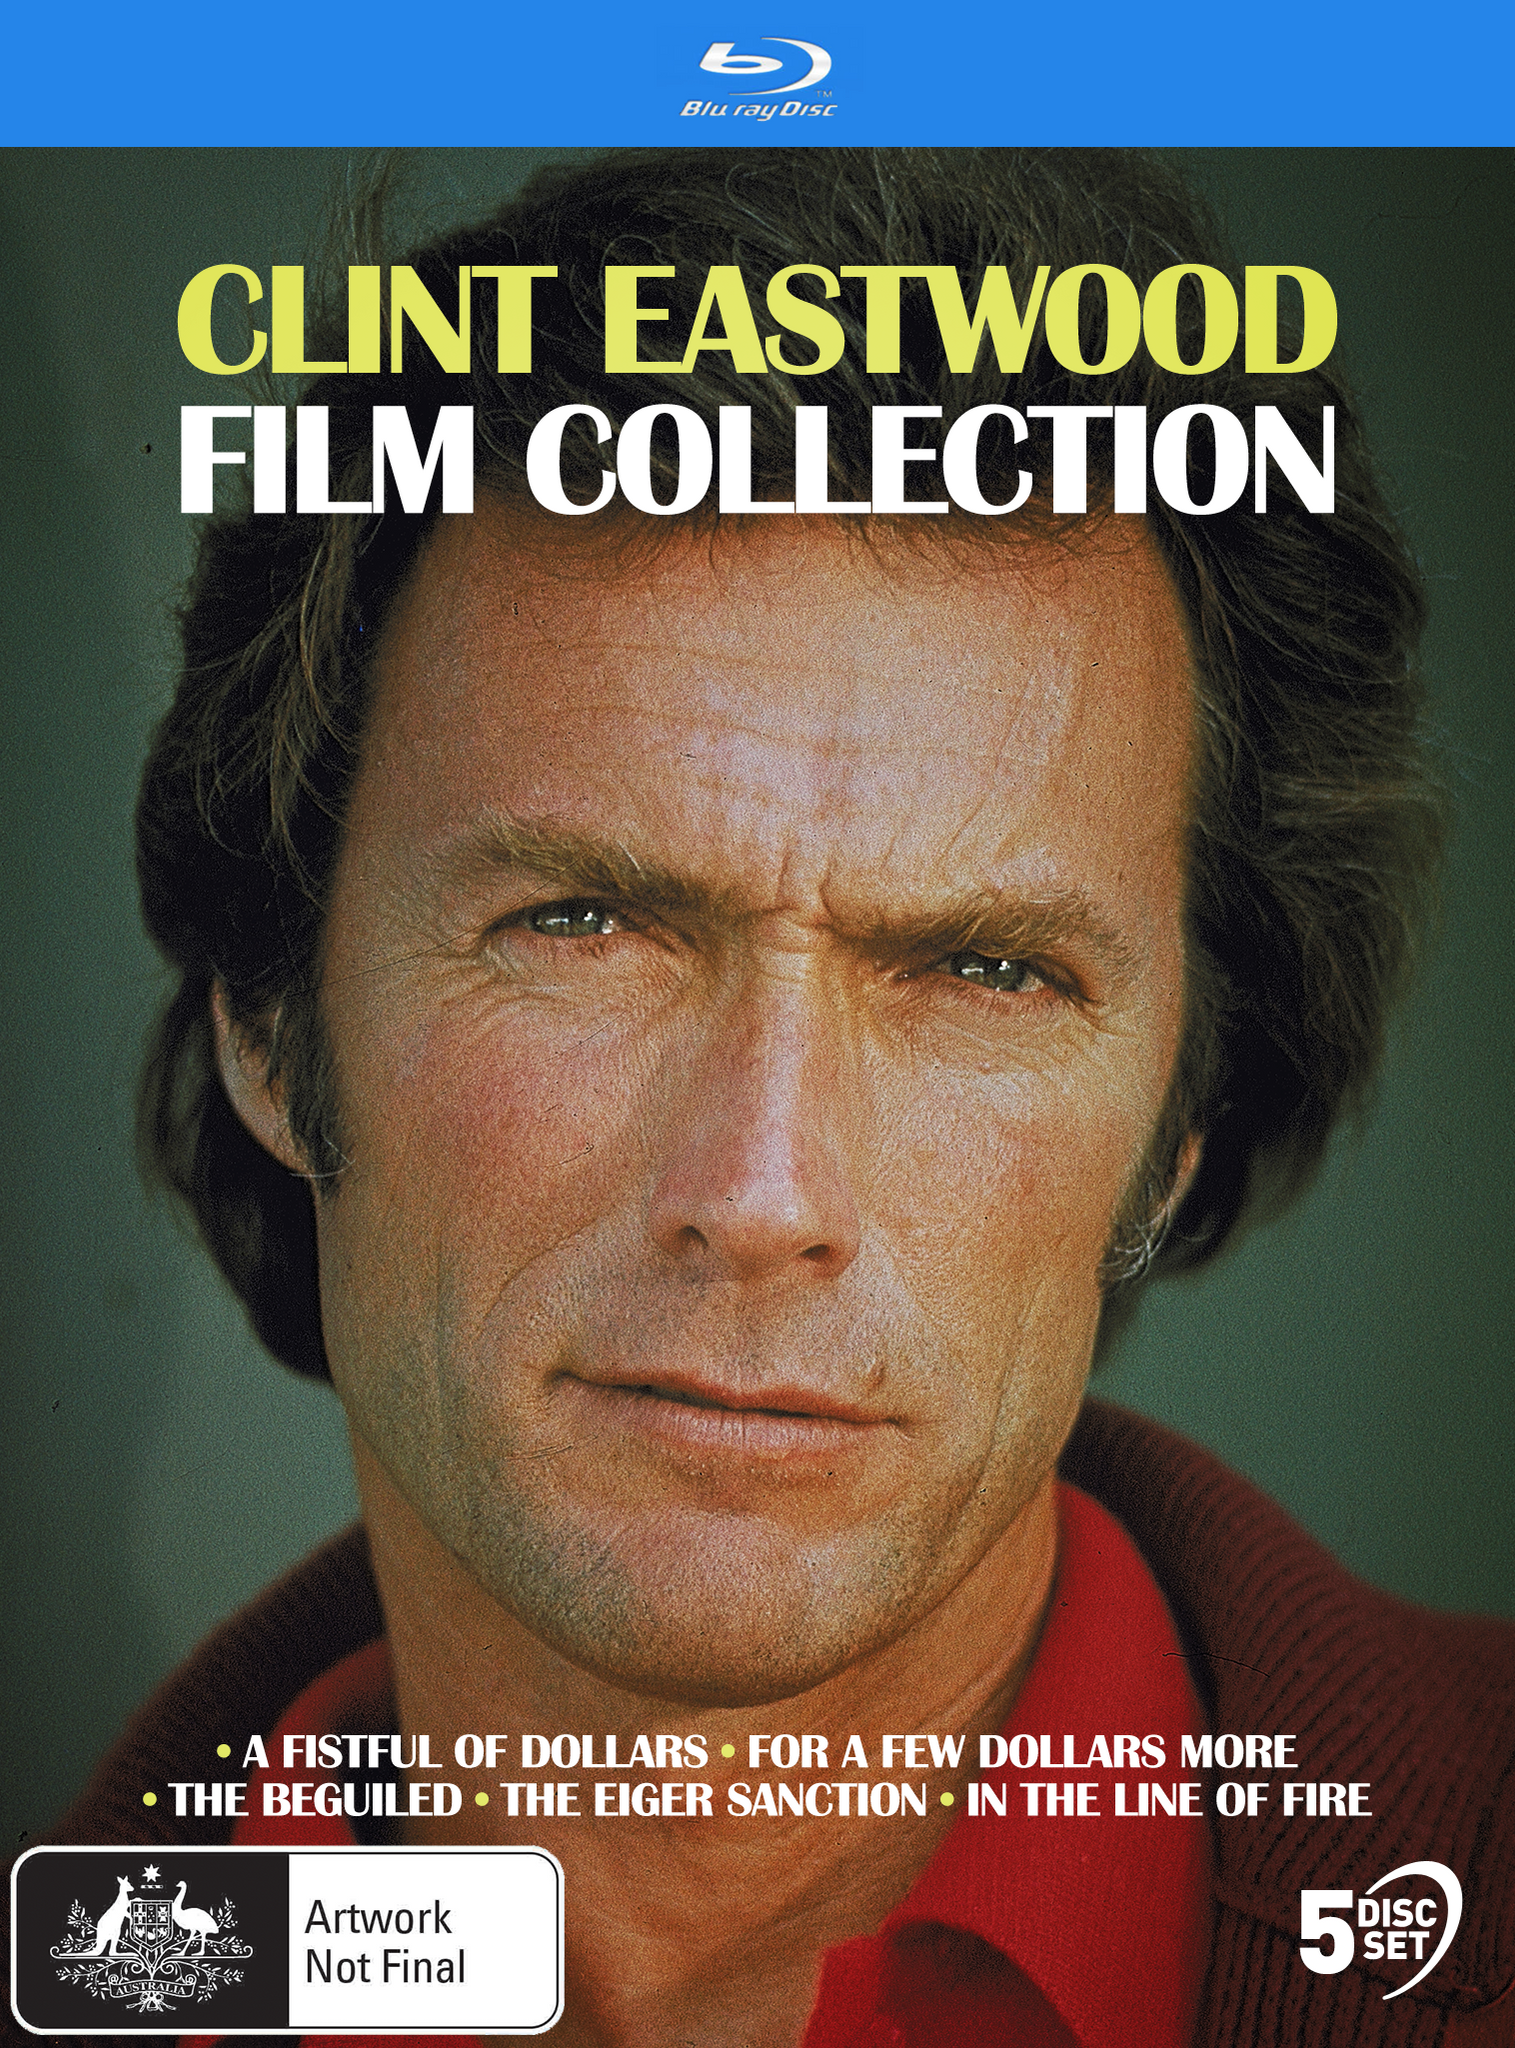 CLINT EASTWOOD: FILM COLLECTION (A FISTFUL OF DOLLARS / FOR A FEW DOLLARS MORE / THE BEGUILED / THE EIGER SANCTION / IN THE LINE OF FIRE) - SPECIAL EDITION BLU-RAY